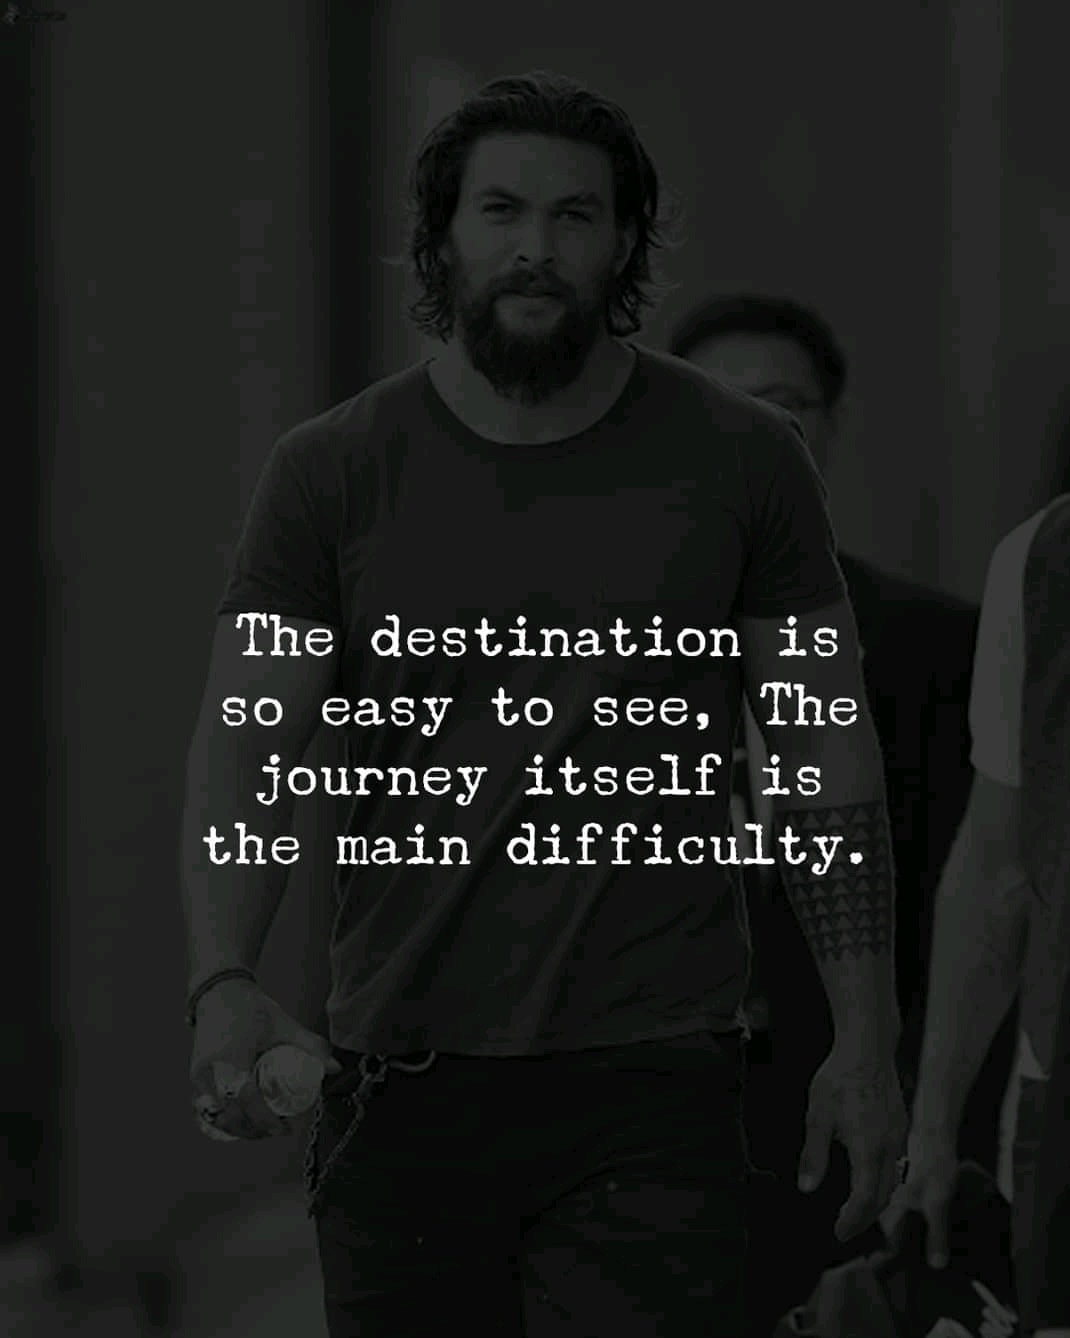 The destination is so easy to see, The journey itself is the main difficulty.